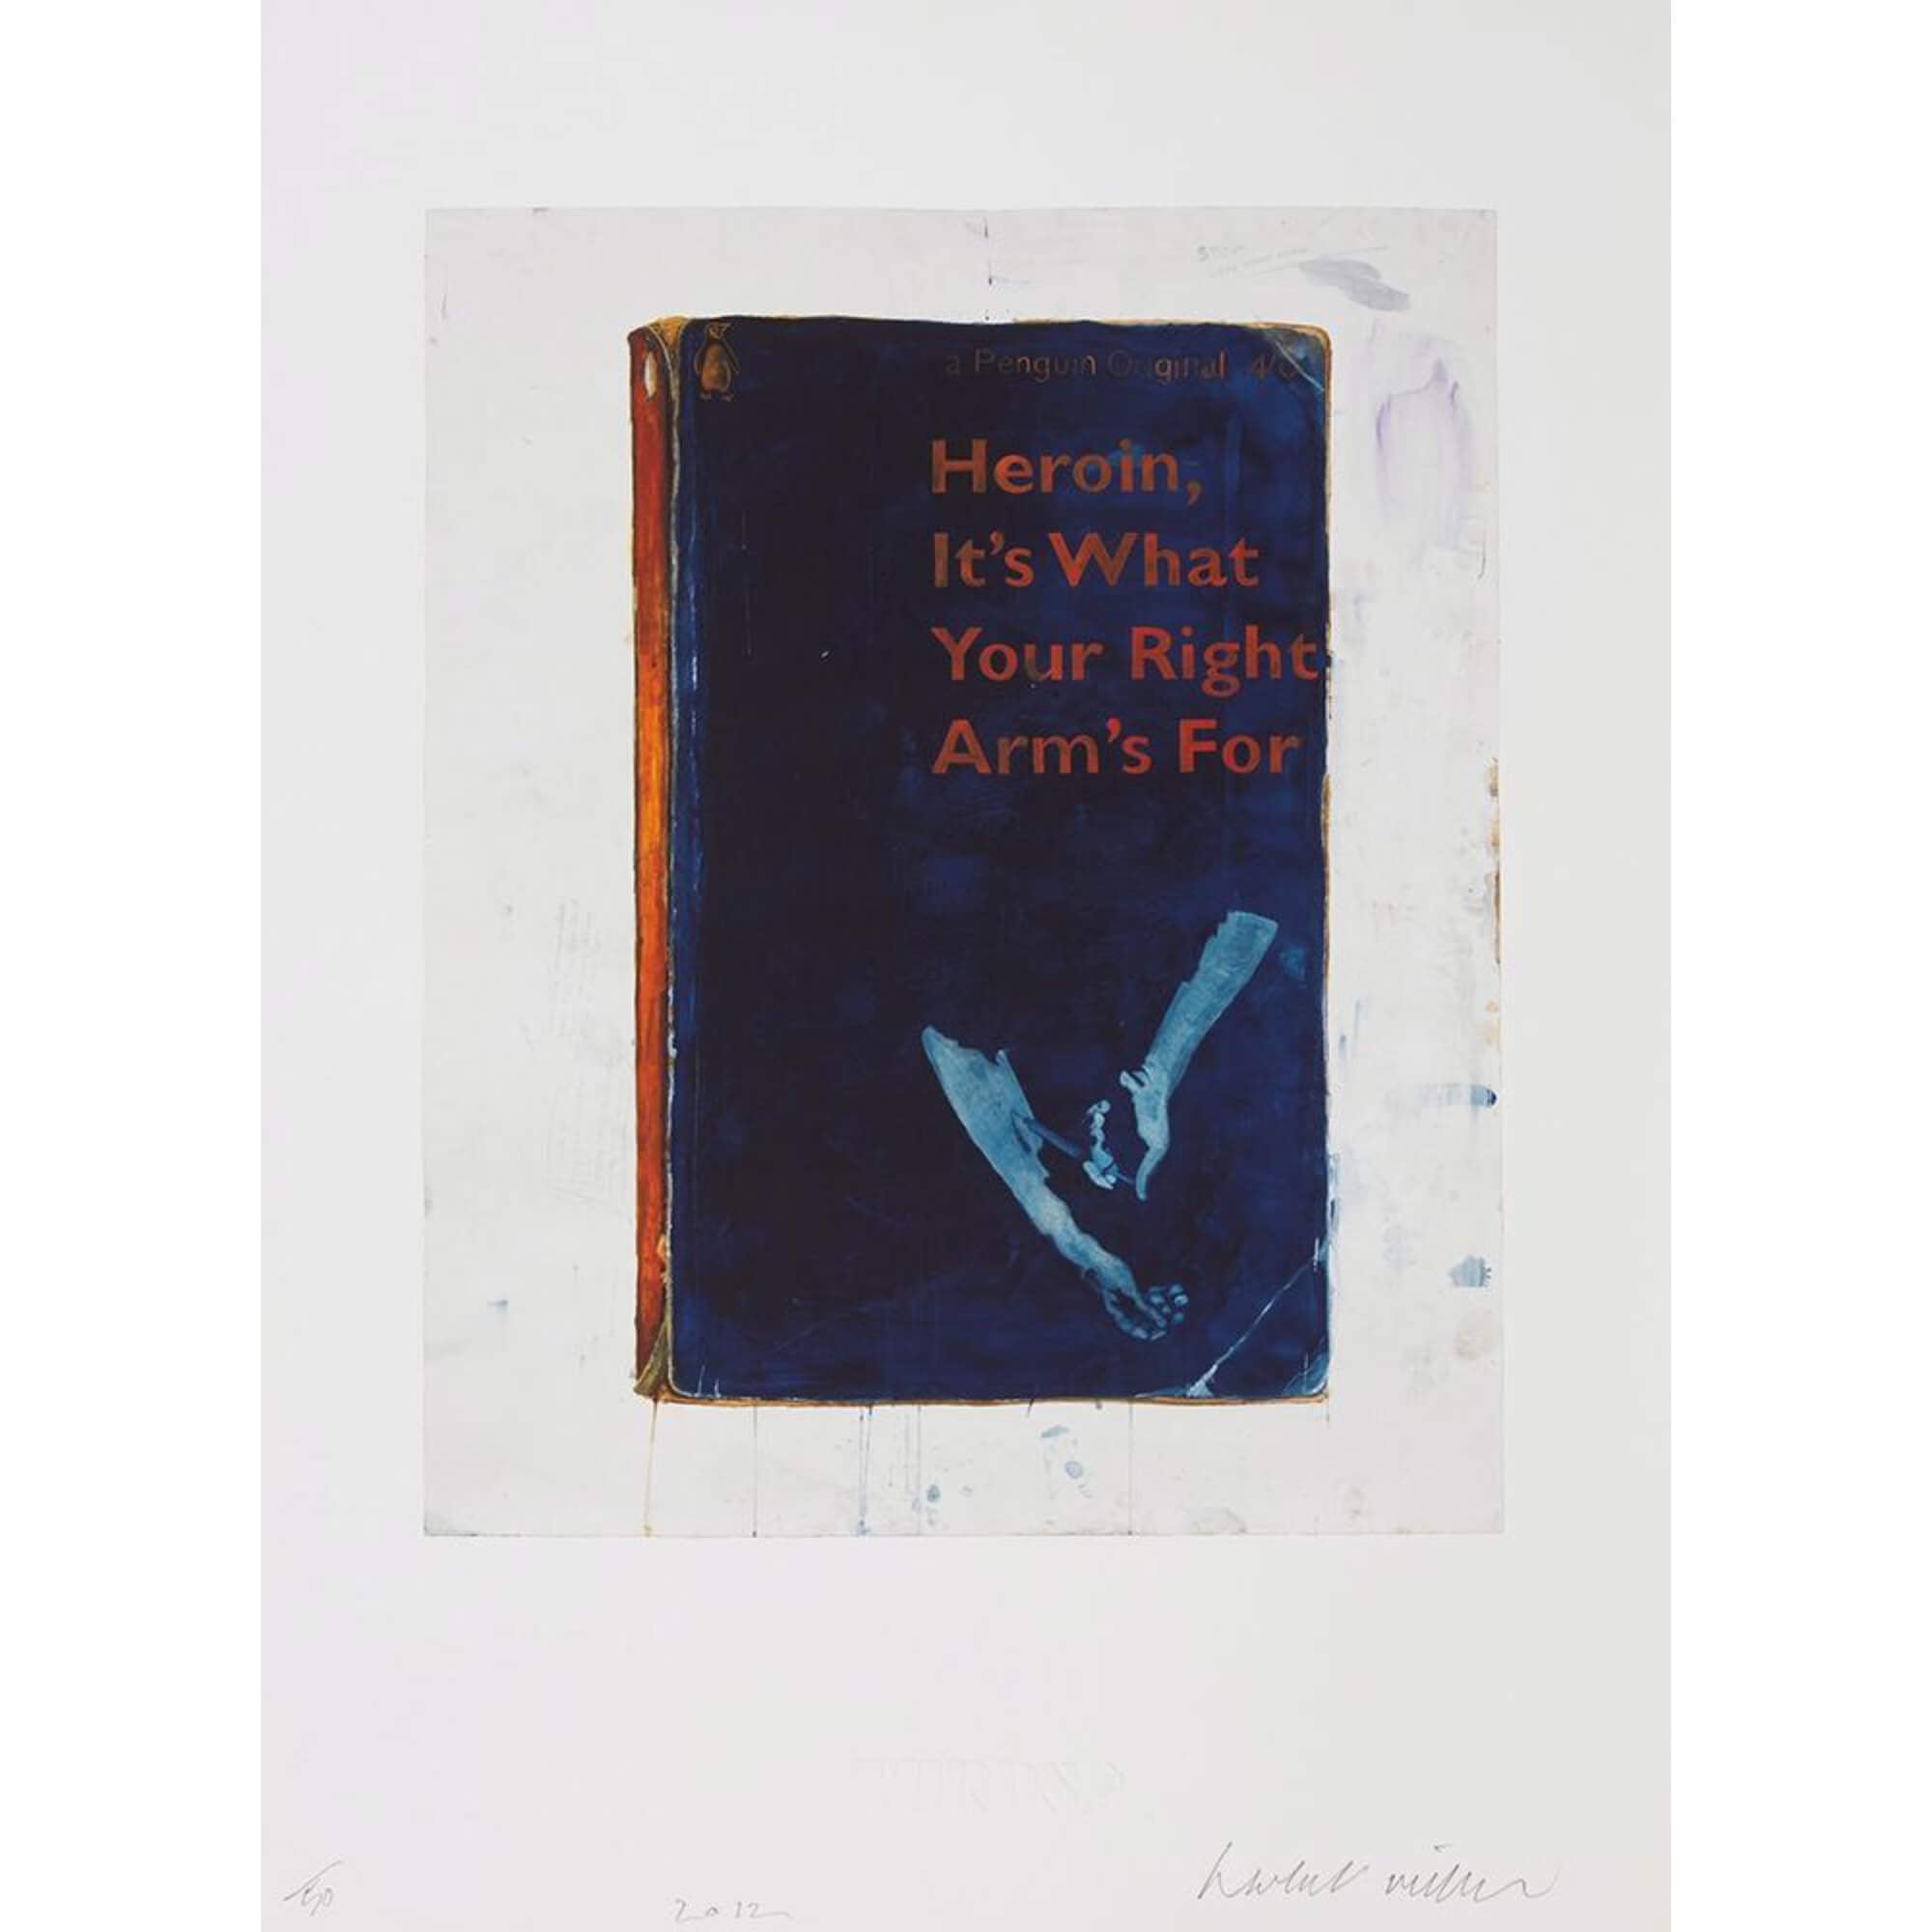 Harland Miller-Heroin, It’s What Your Right Arm’s For - Harland Miller-art print